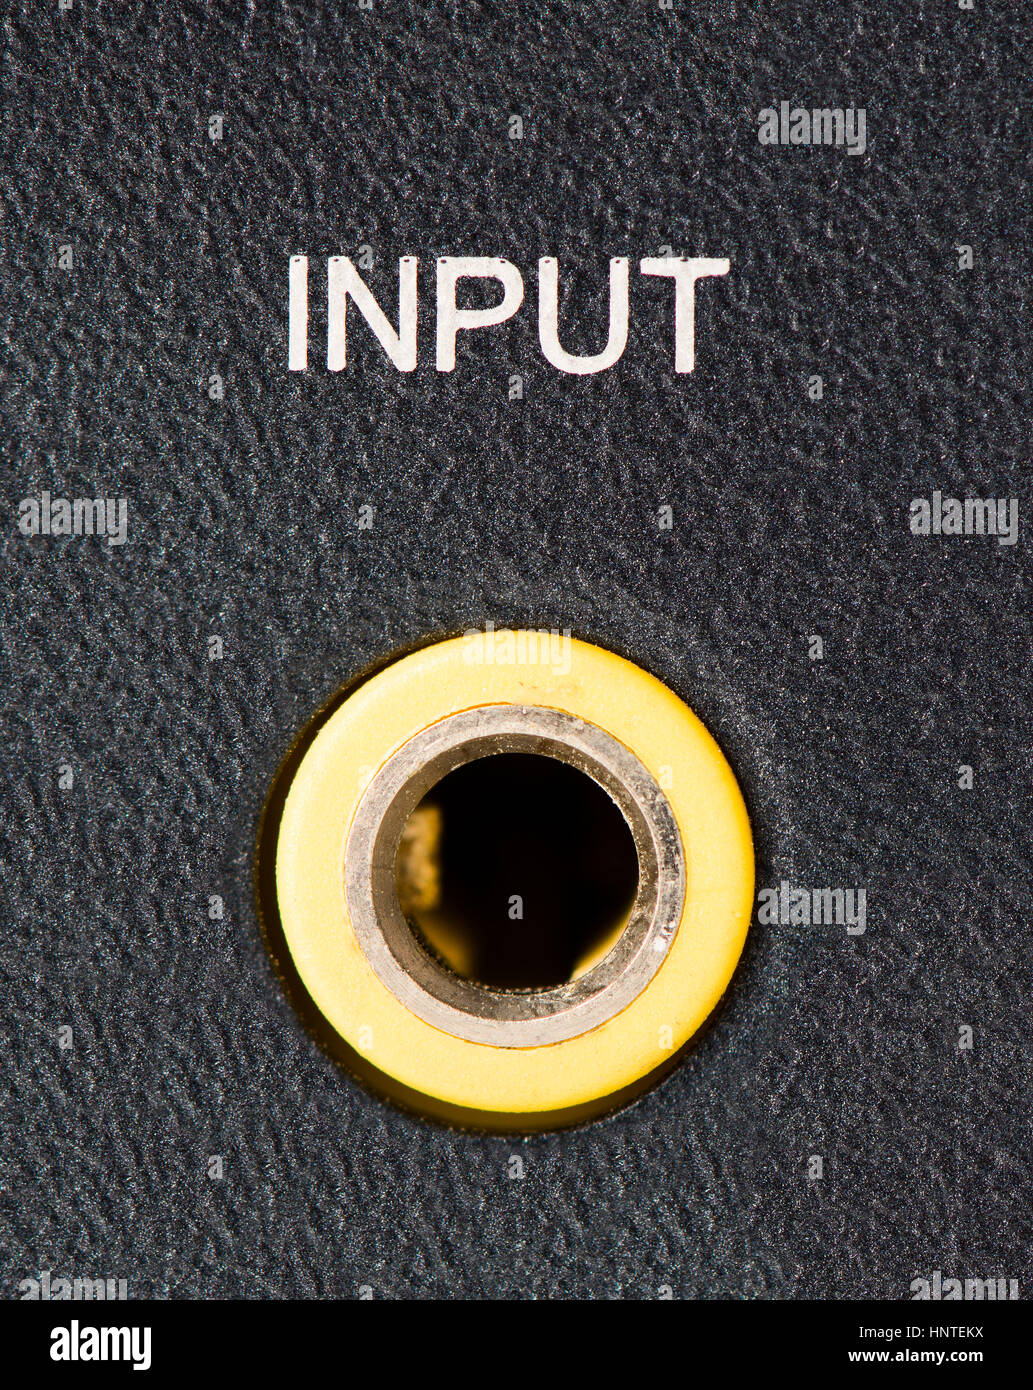 Closeup of a yellow headphone/auxiliary port on the back of a computer speaker. Stock Photo